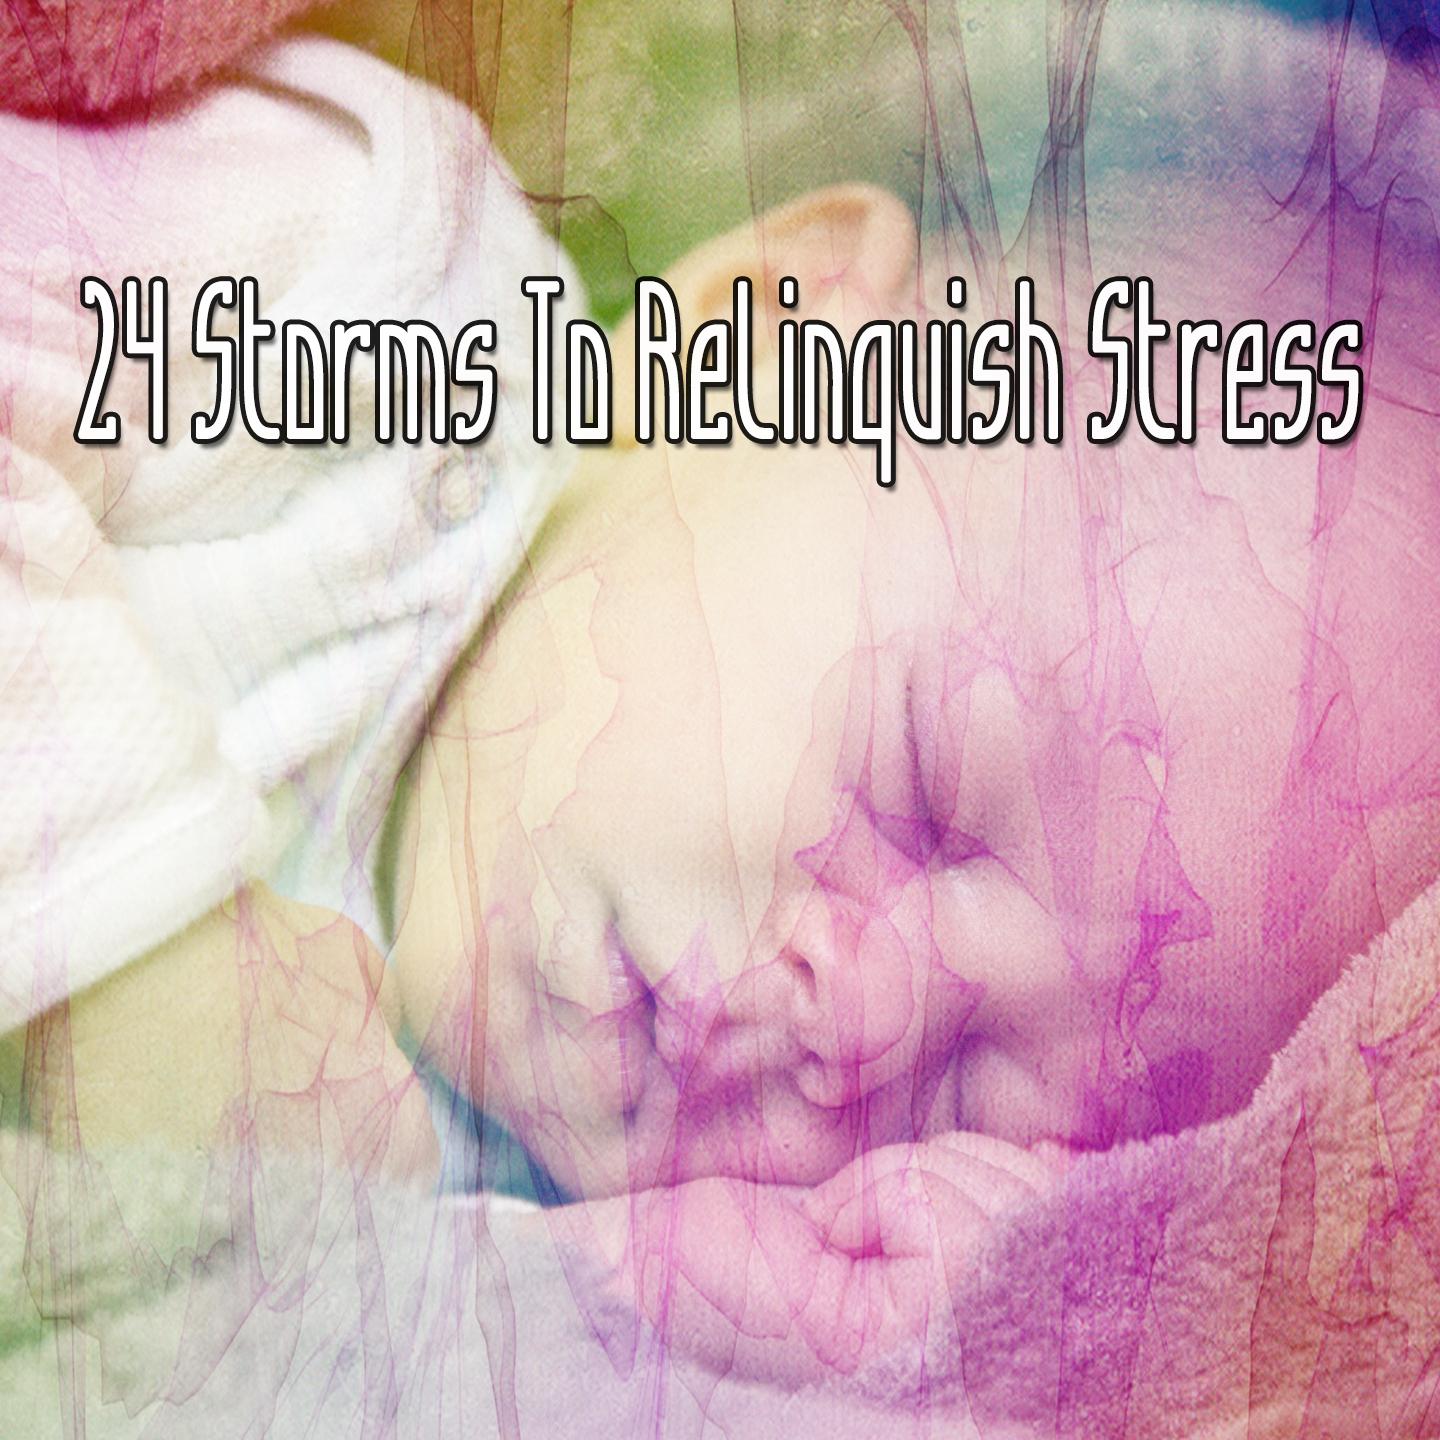 24 Storms to Relinquish Stress